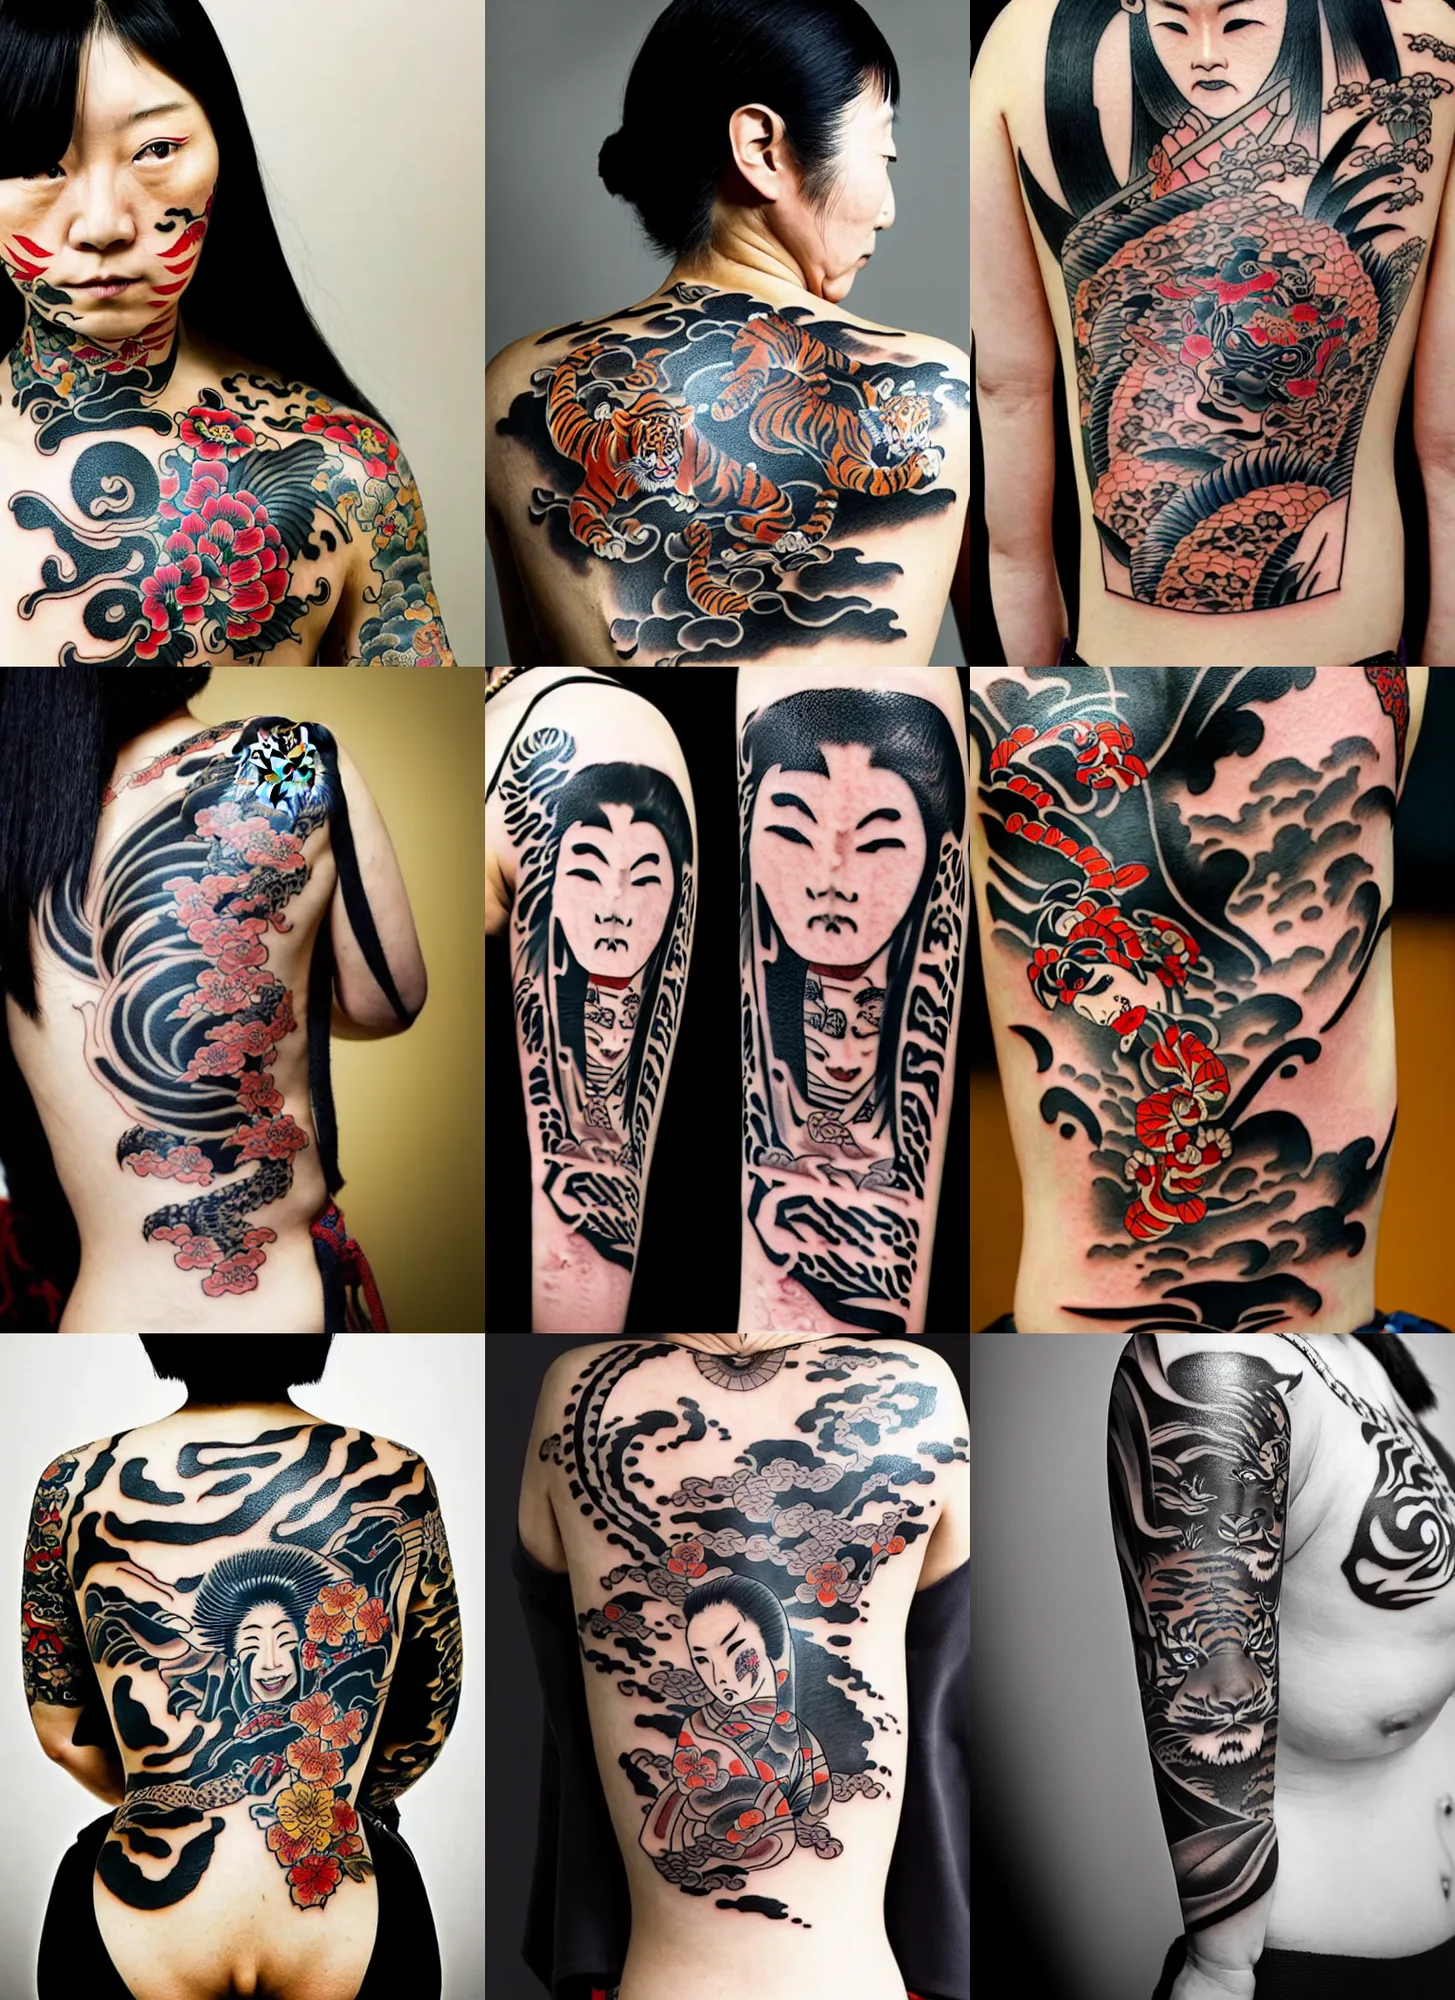 Prompt: japanese woman with irezumi tattoos with intricate designs with tigers and christopher walken as a samurai, facing away from camera, amazing detail, sharp, dynamic lighting